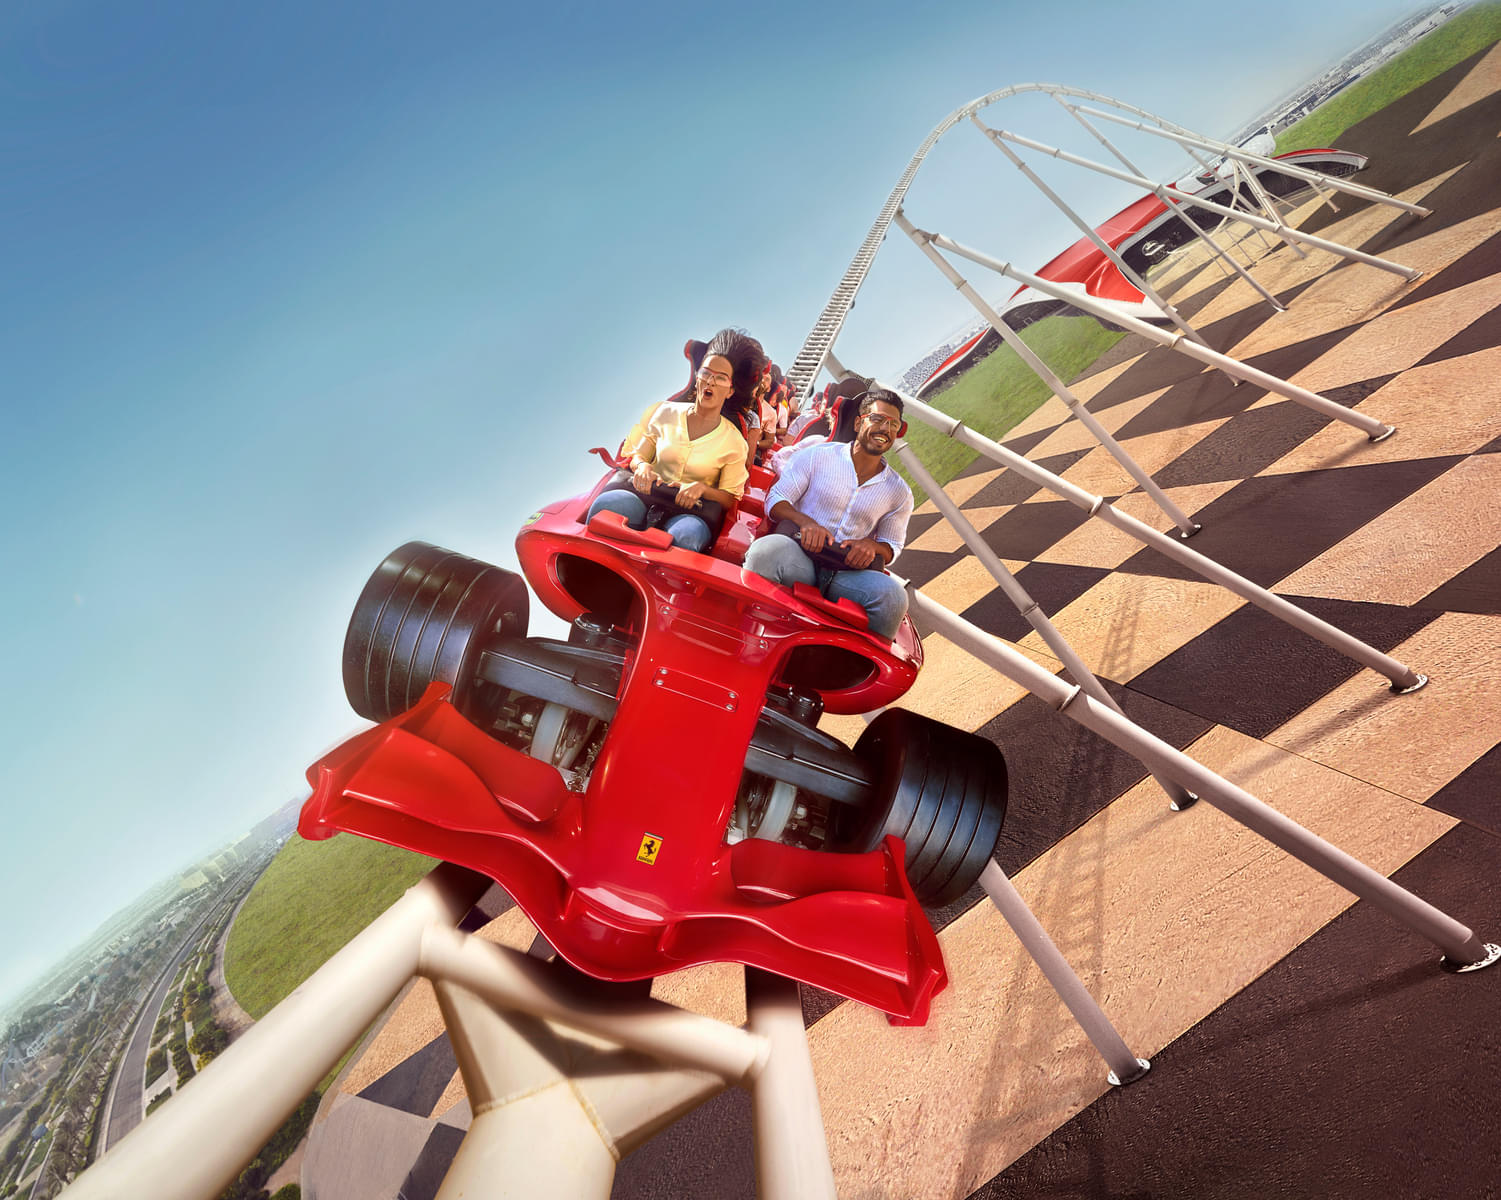 Feel the adrenaline as you ride the world's fastest rollercoaster